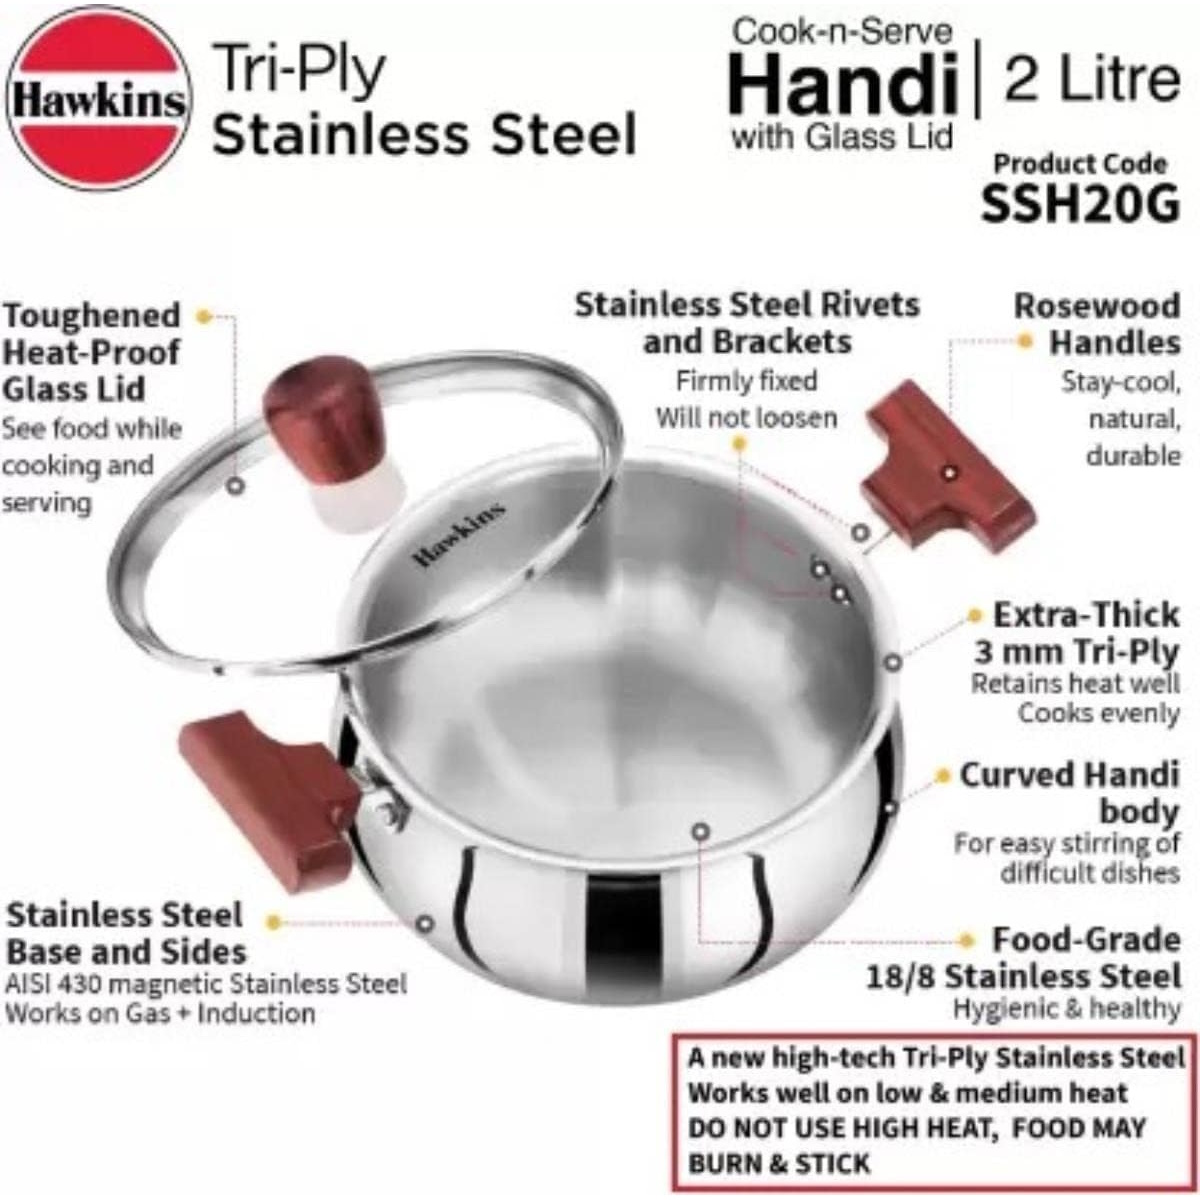 Hawkins Tri-ply Stainless Steel Handi 2 Litre With Glass Lid (SSH20G)